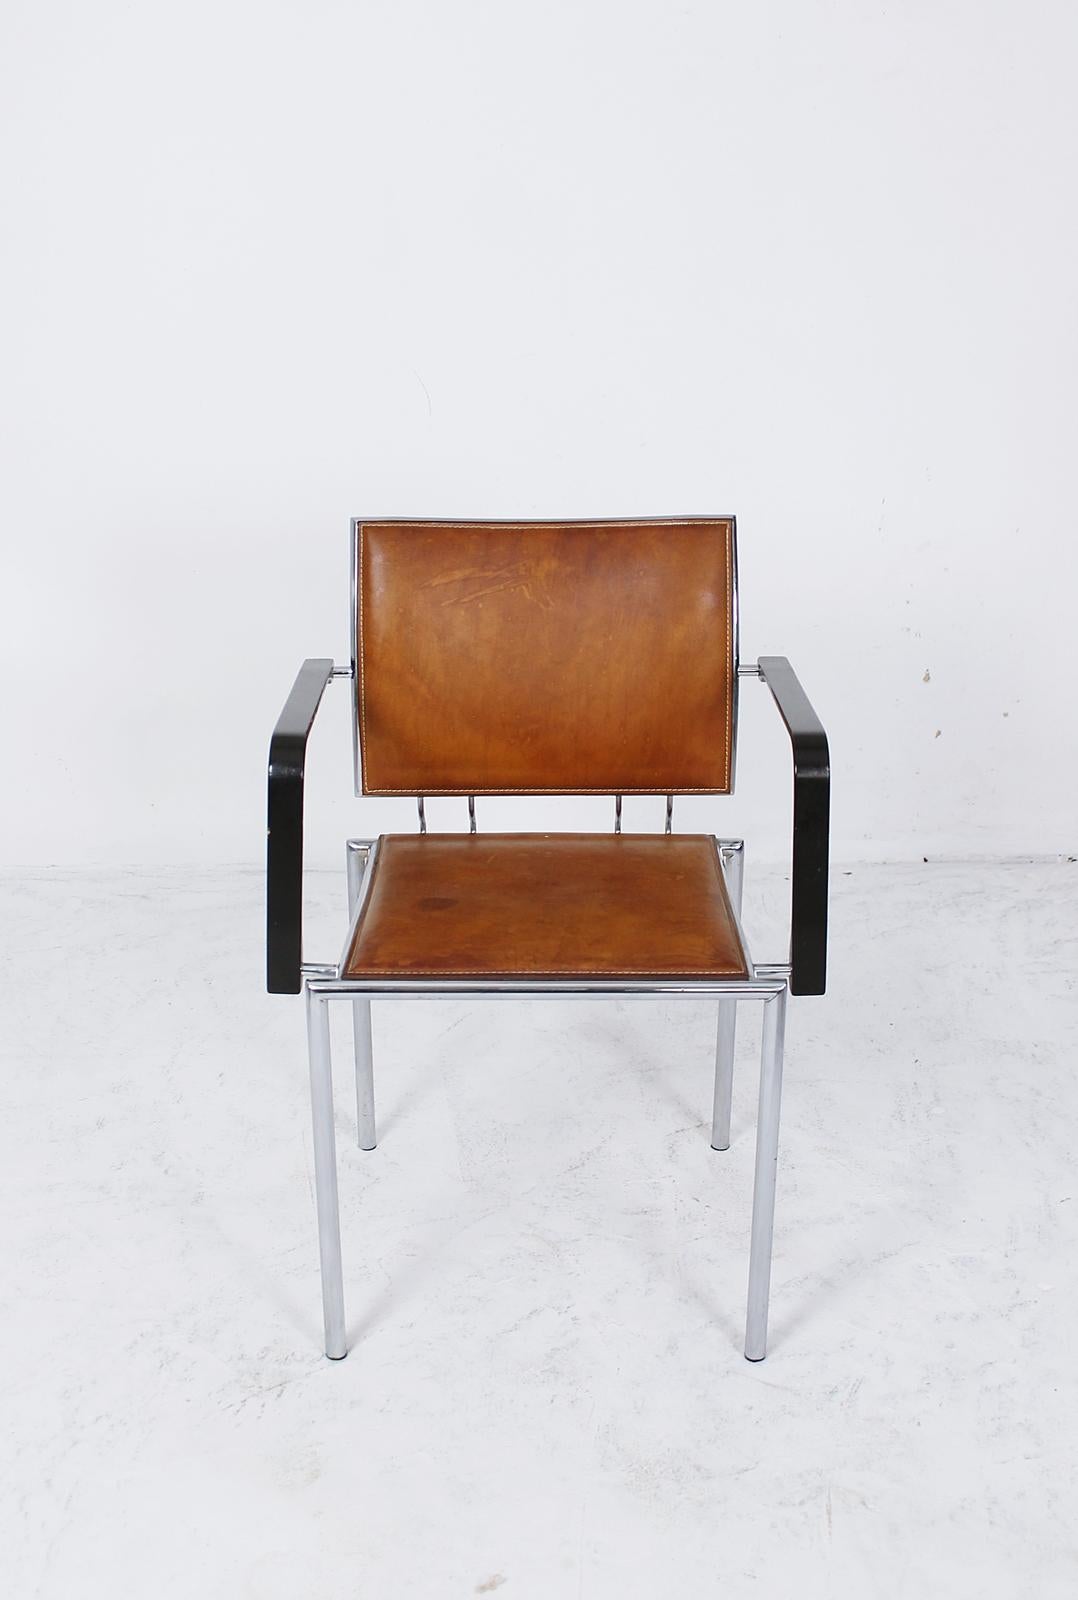 Modern Swiss Armchair Quadro Steel by Bruno Rey & Charles Polin for Dietiker, 1990s For Sale